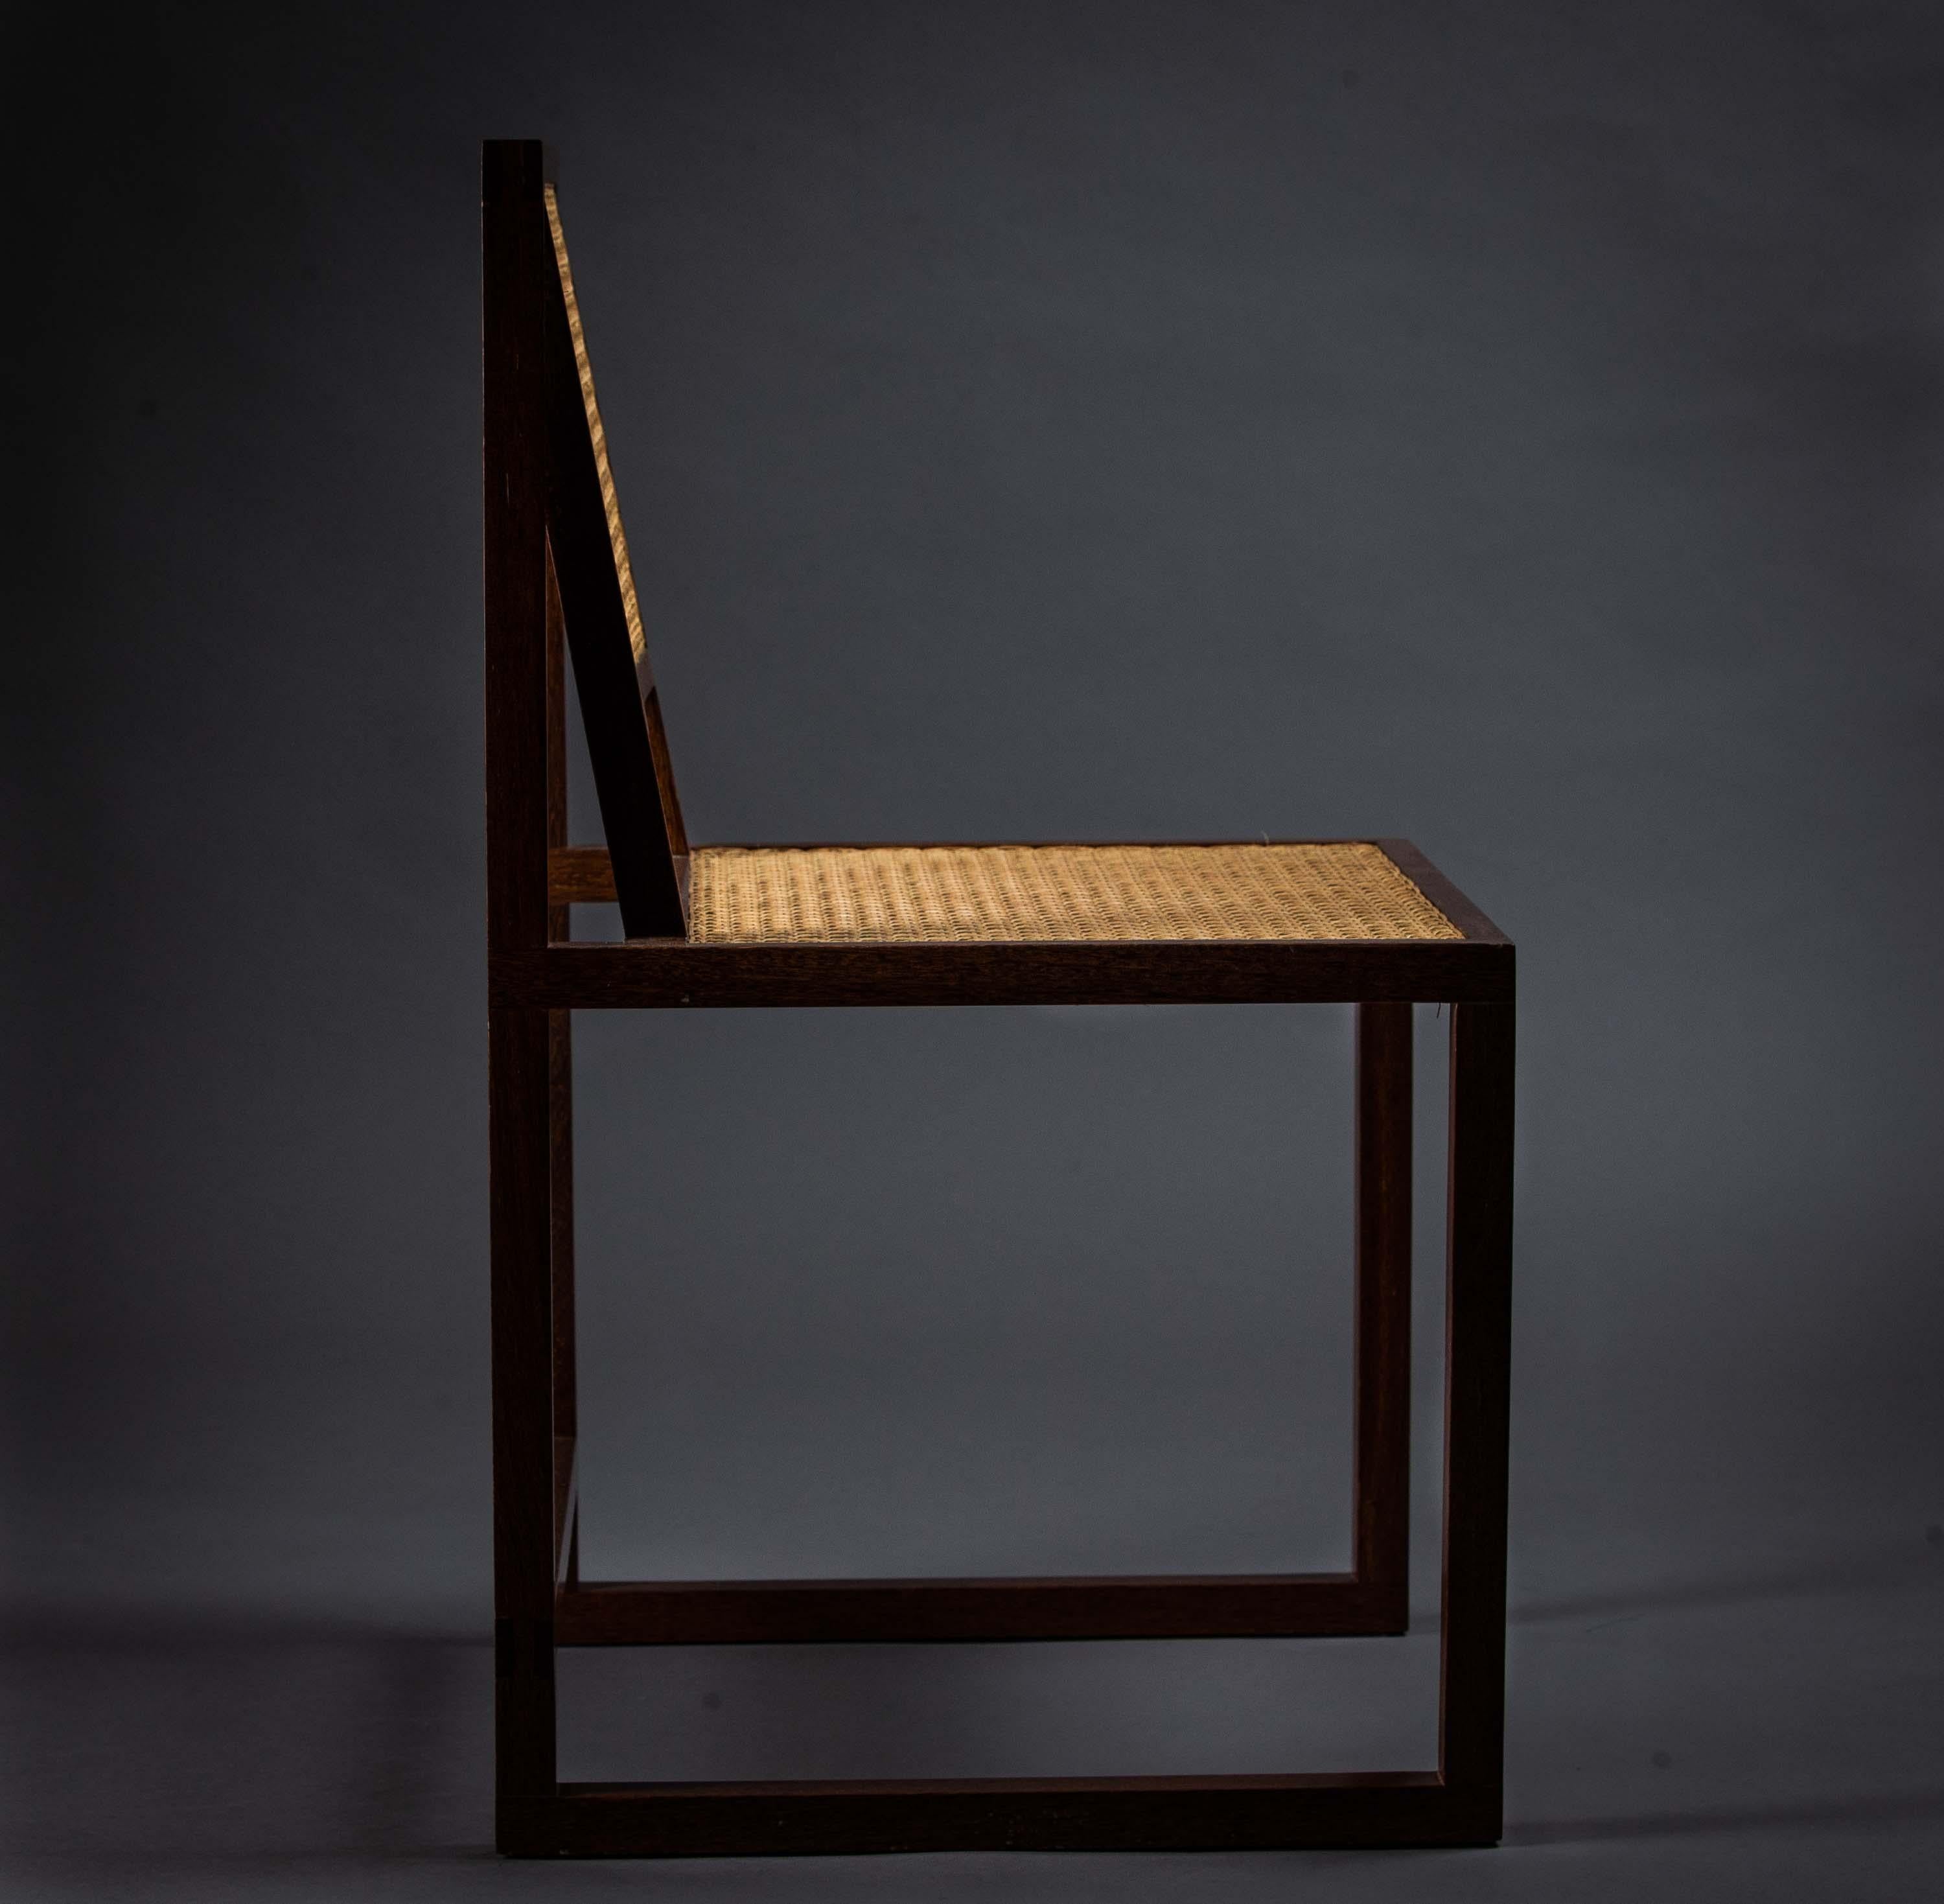 Contemporary The Square Chair. Produced with Solid Wood Using Mortise and Tenon Joinery.  For Sale